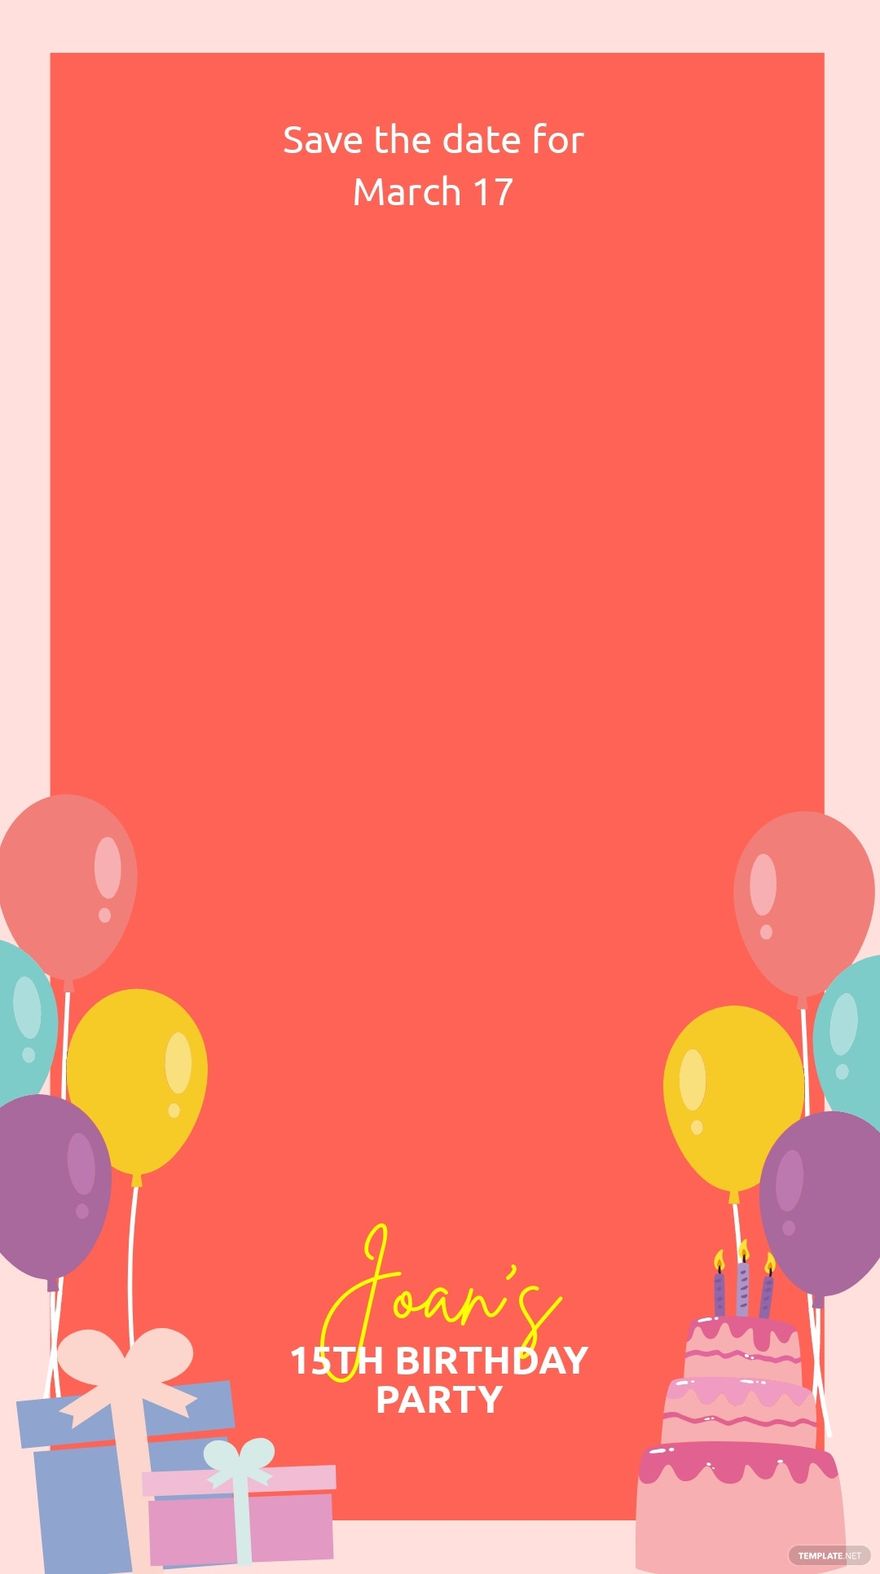 Save The Date Party Snapchat Geofilter